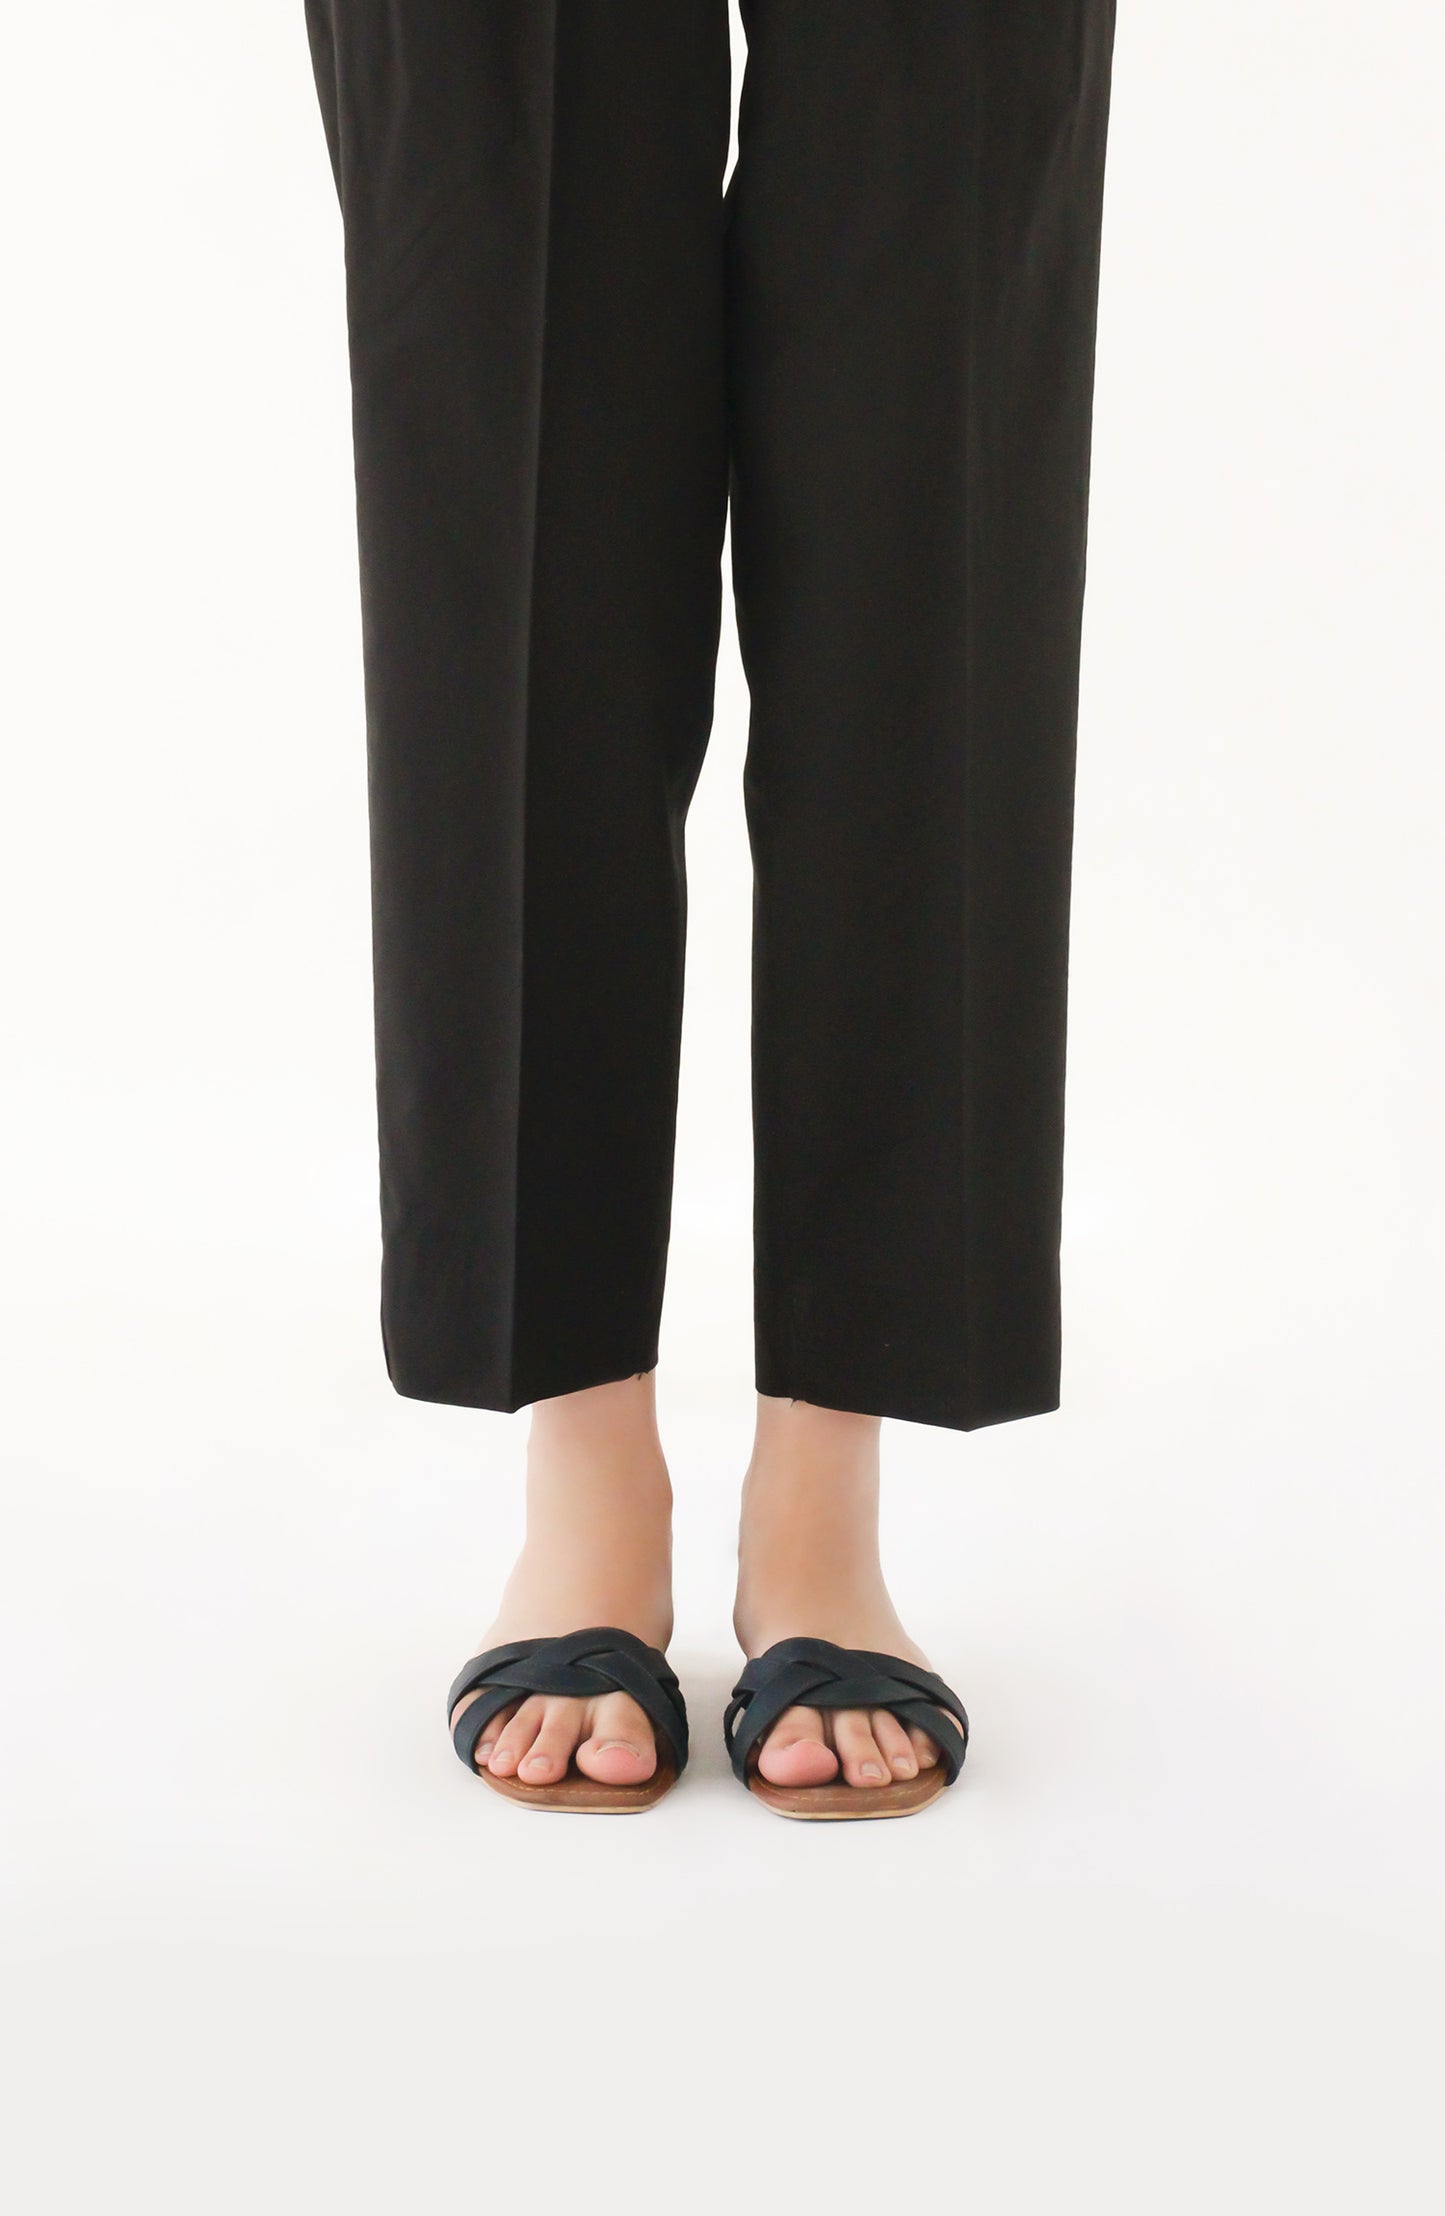 NRP-122/S BLACK CAMBRIC SCPANTS STITCHED BOTTOMS PANTS